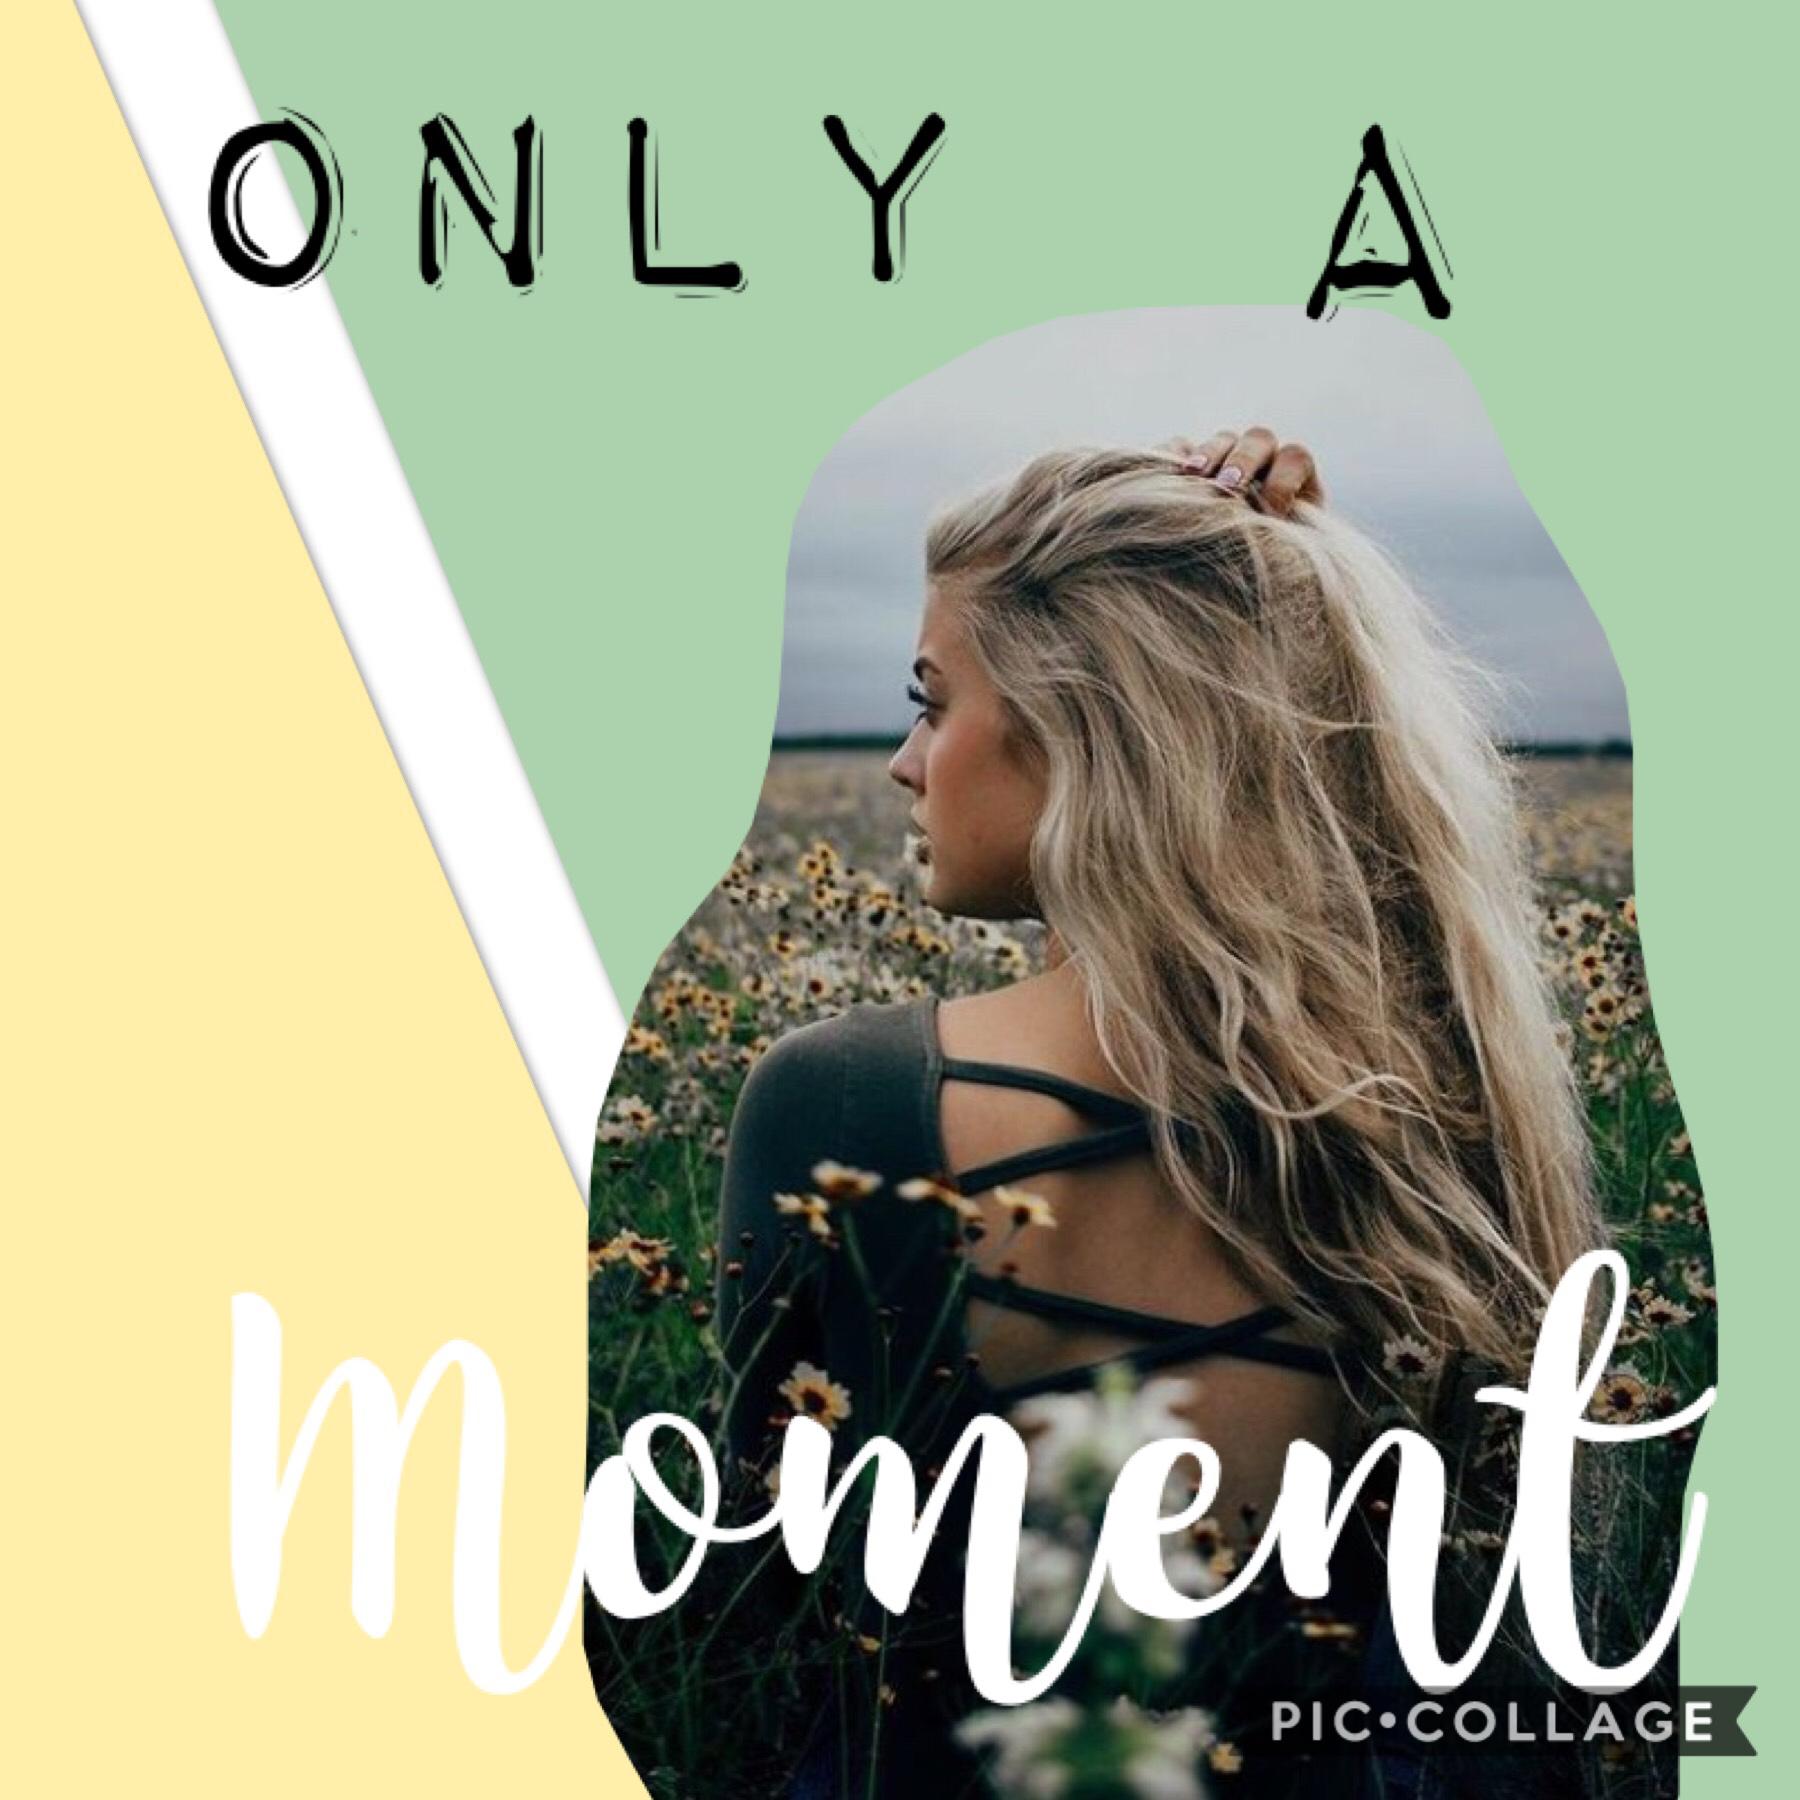 We are all only a moment         ☀️